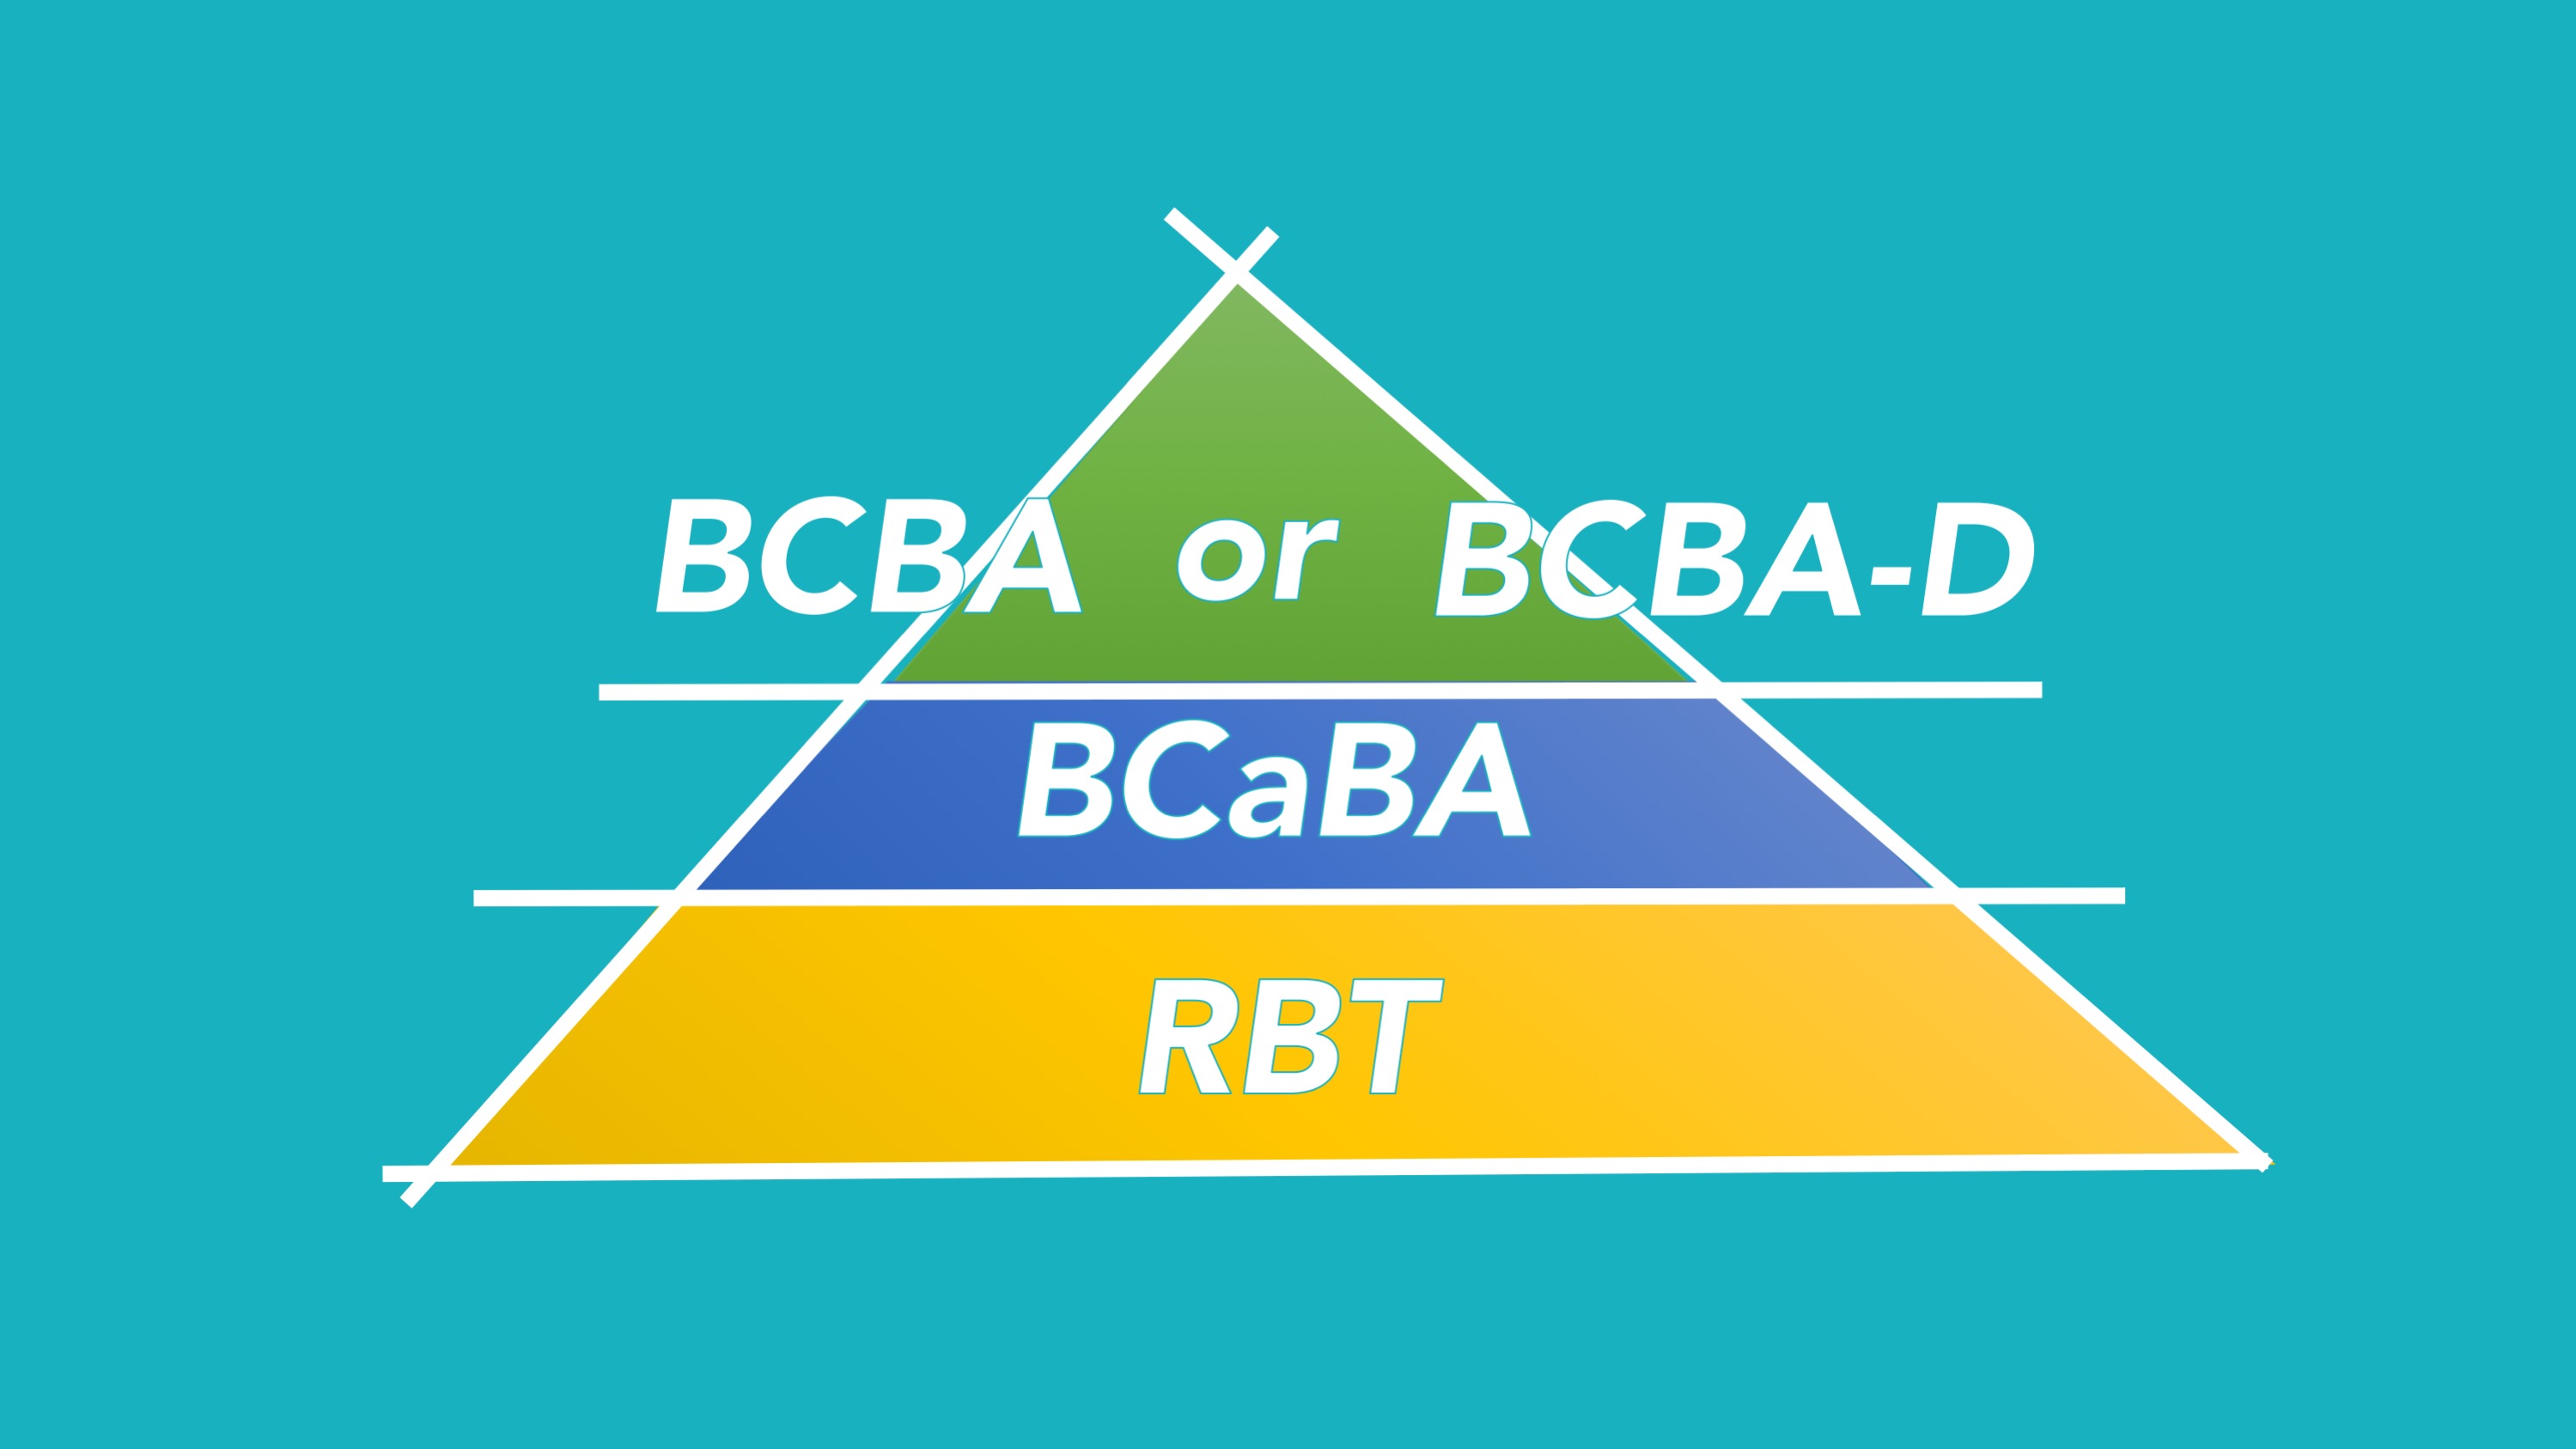 Pyramid showing the levels of certification